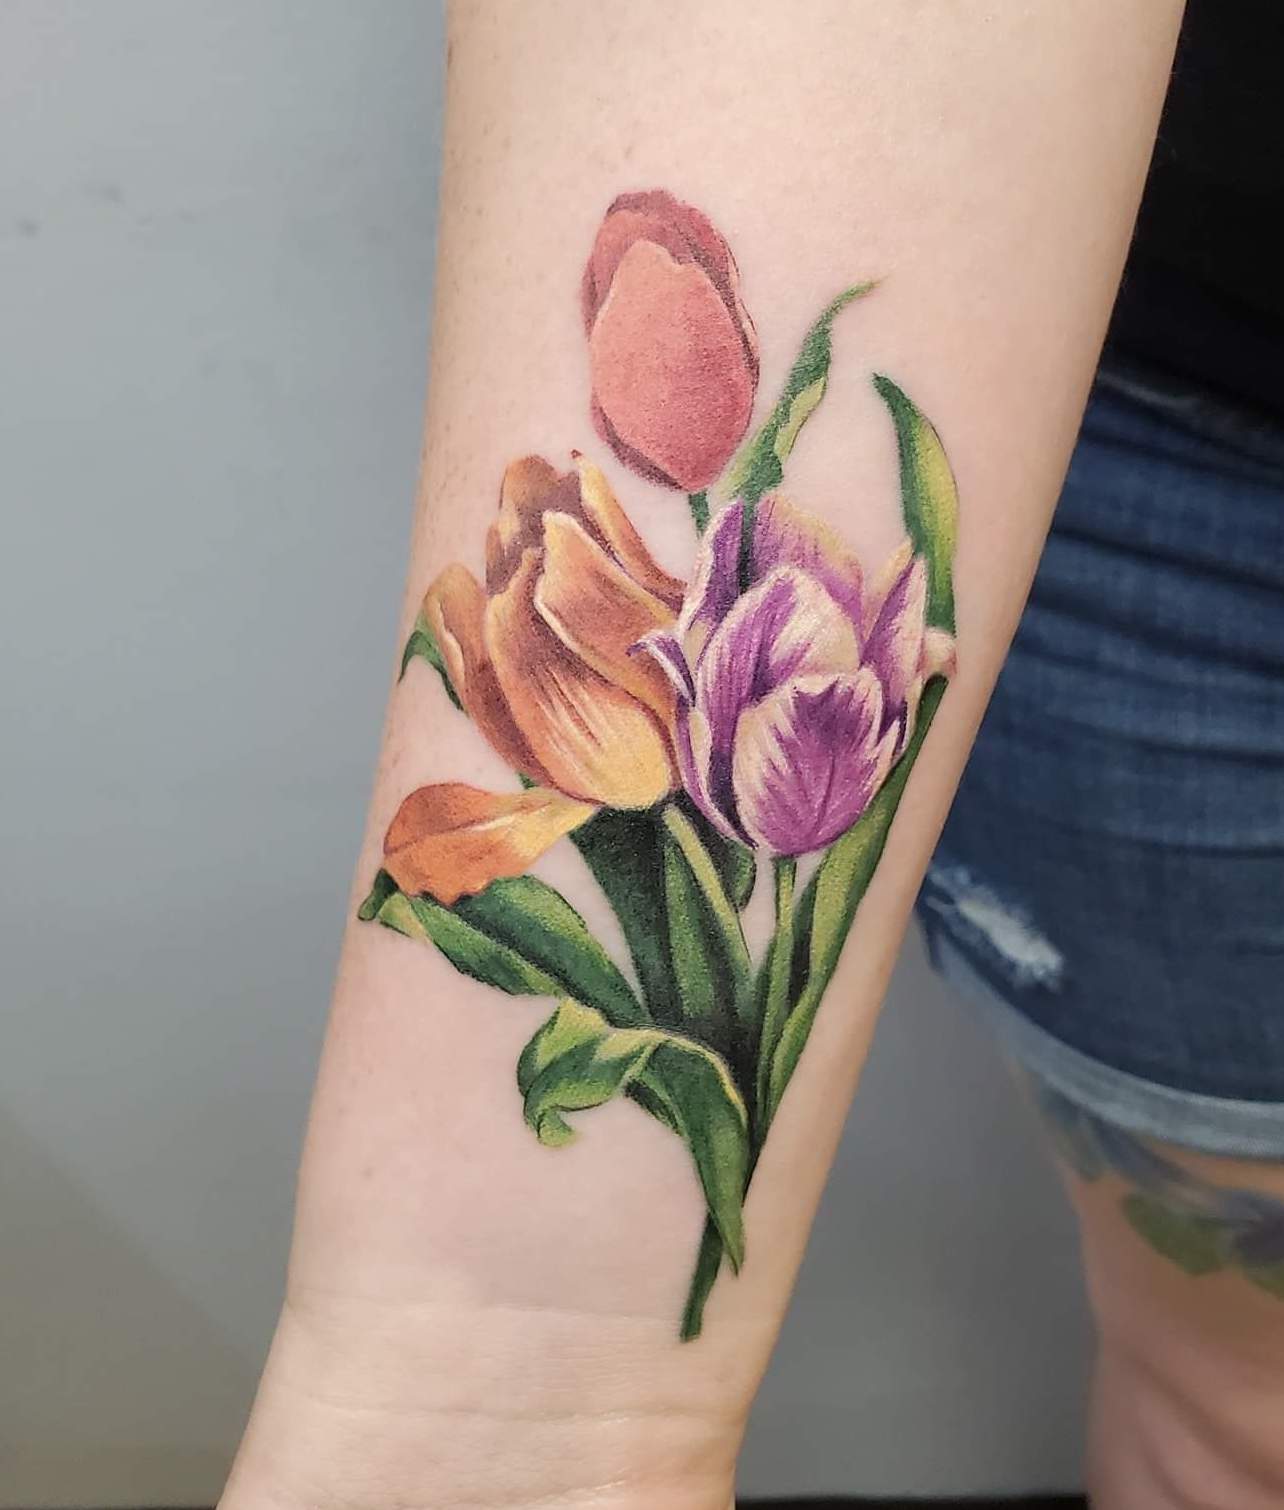 A tattoo of a bouquet of tulips that are purple orange and pink